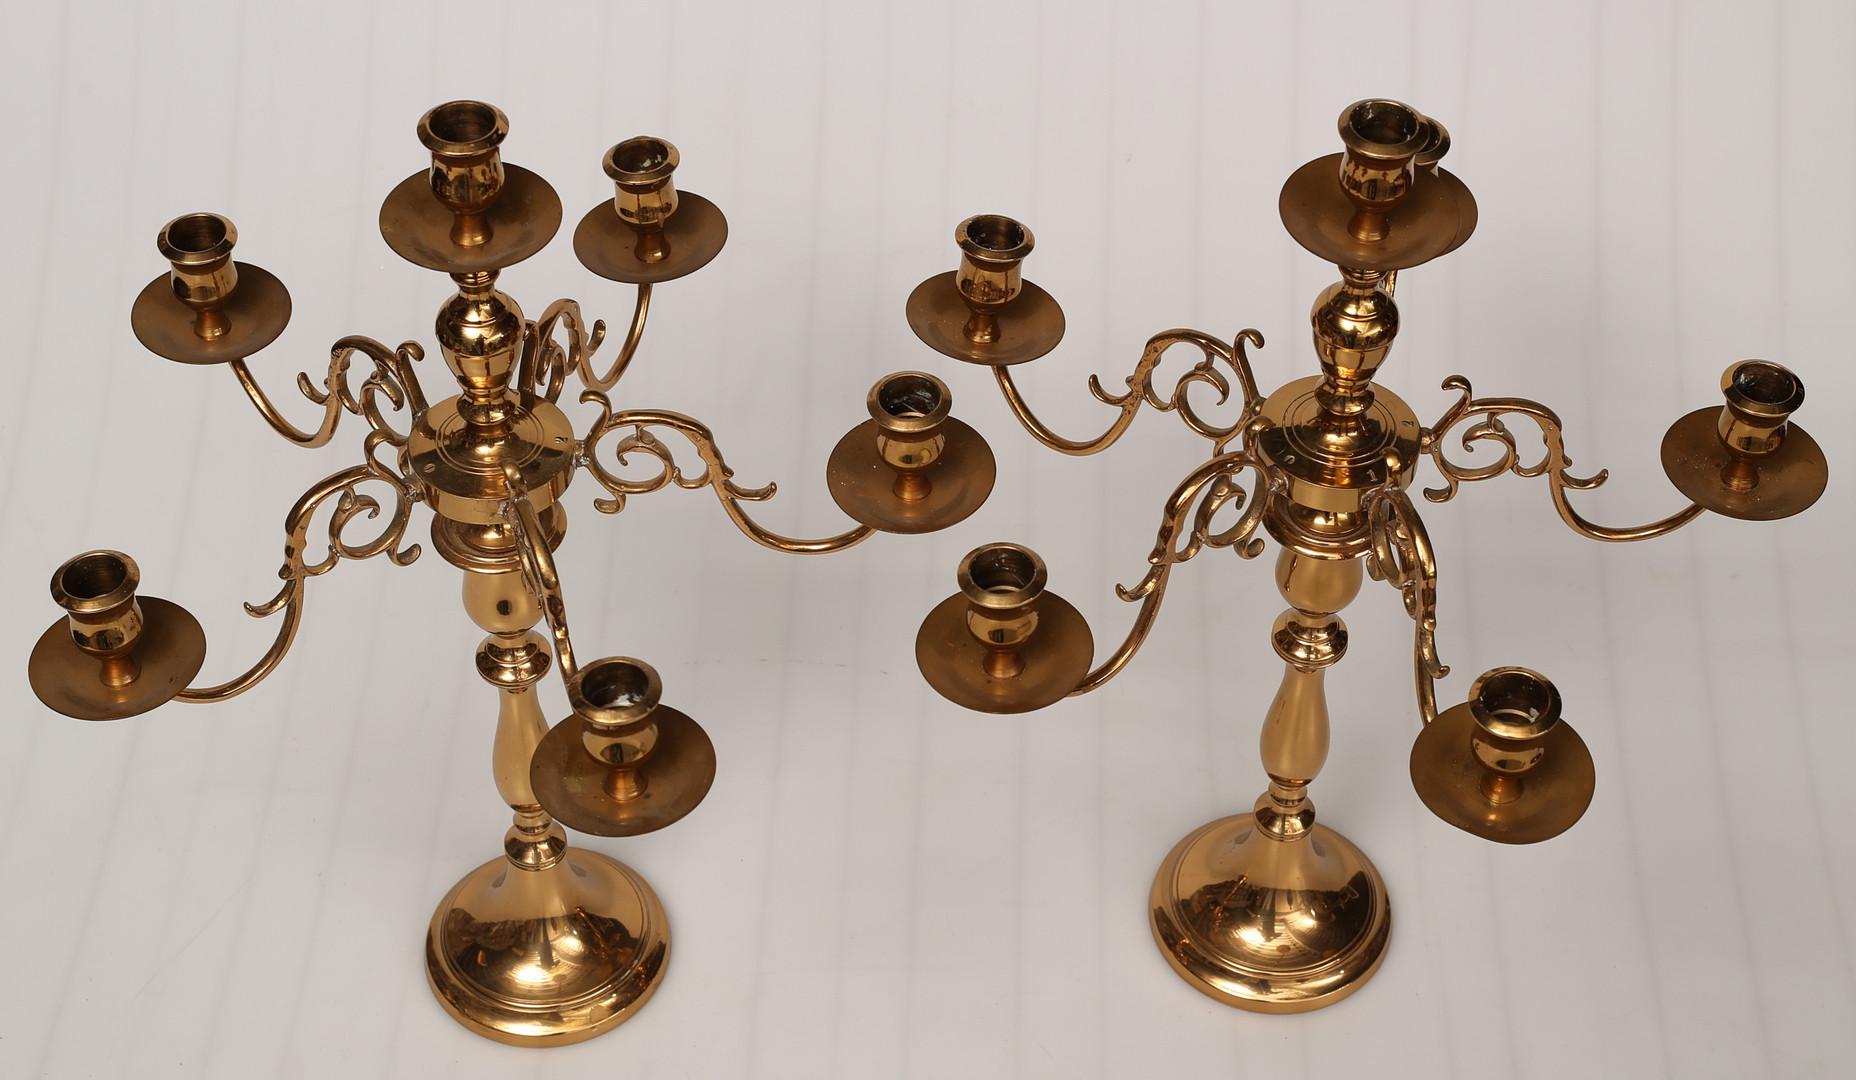 Swedish Antique Pair of Candle Holder Golden Brass Rococo Style Candlesticks Home Decor For Sale